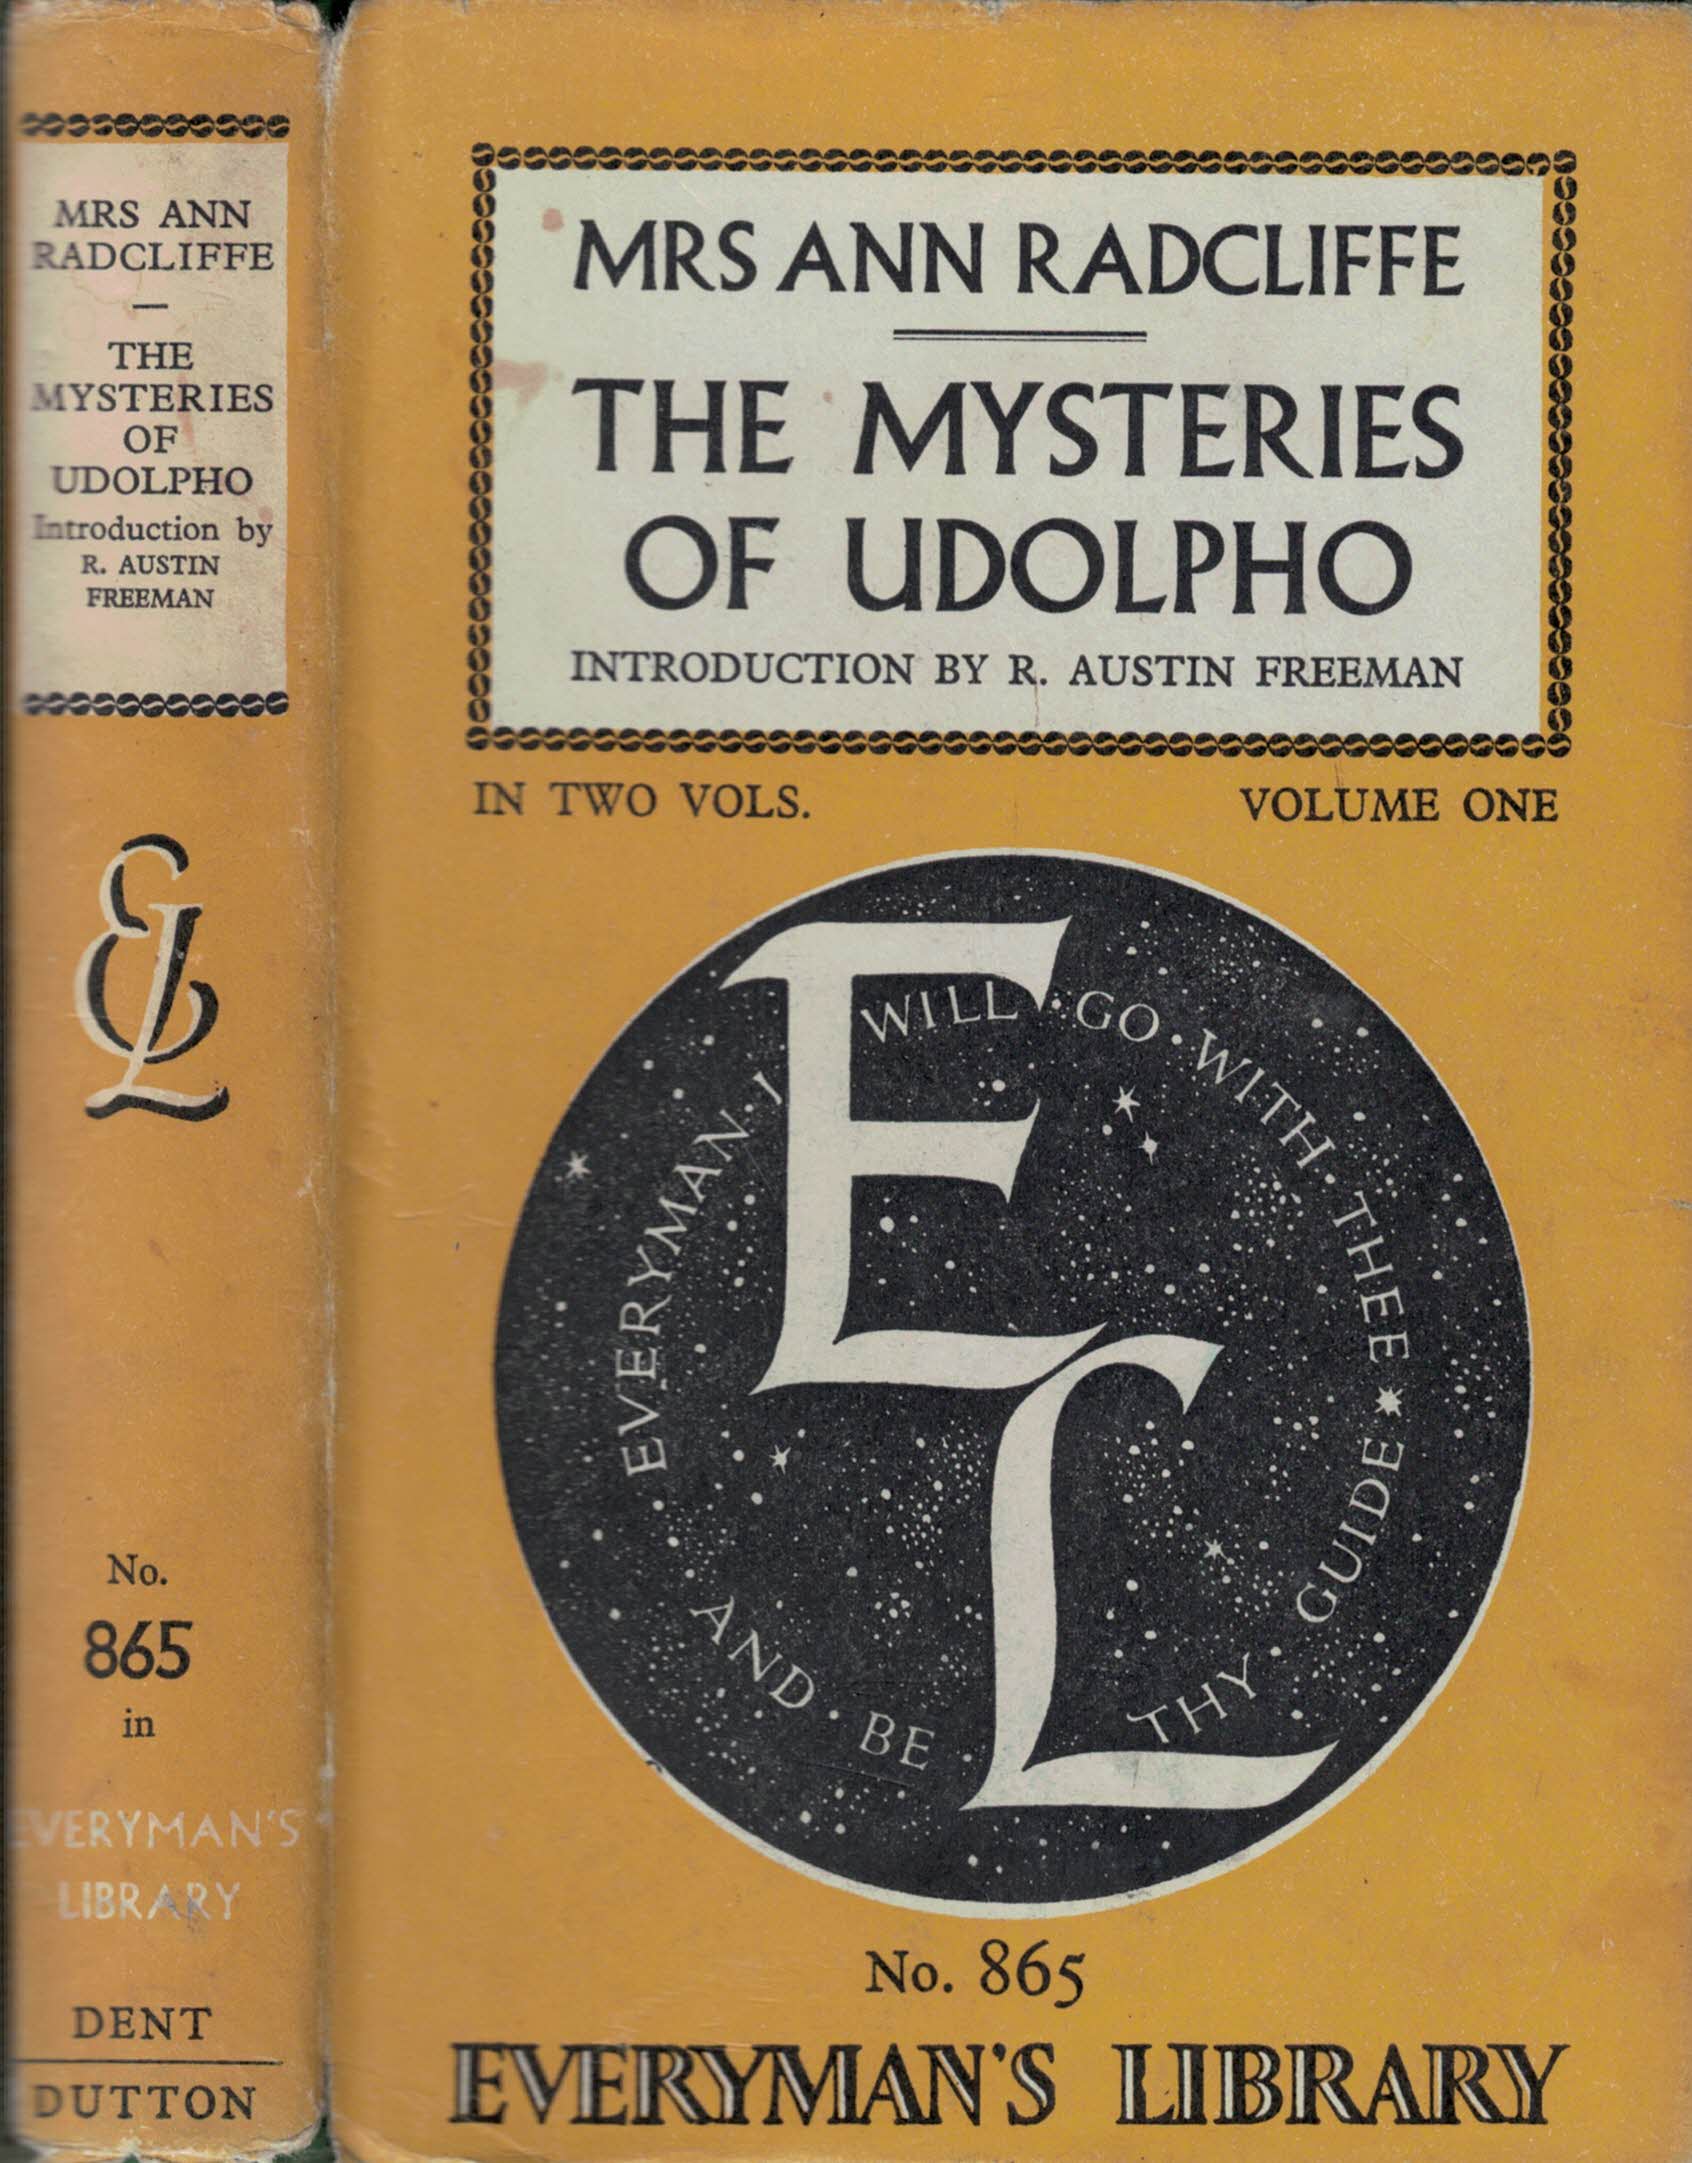 The Mysteries of Udolpho. Volume 1. Everyman's Library No. 865.